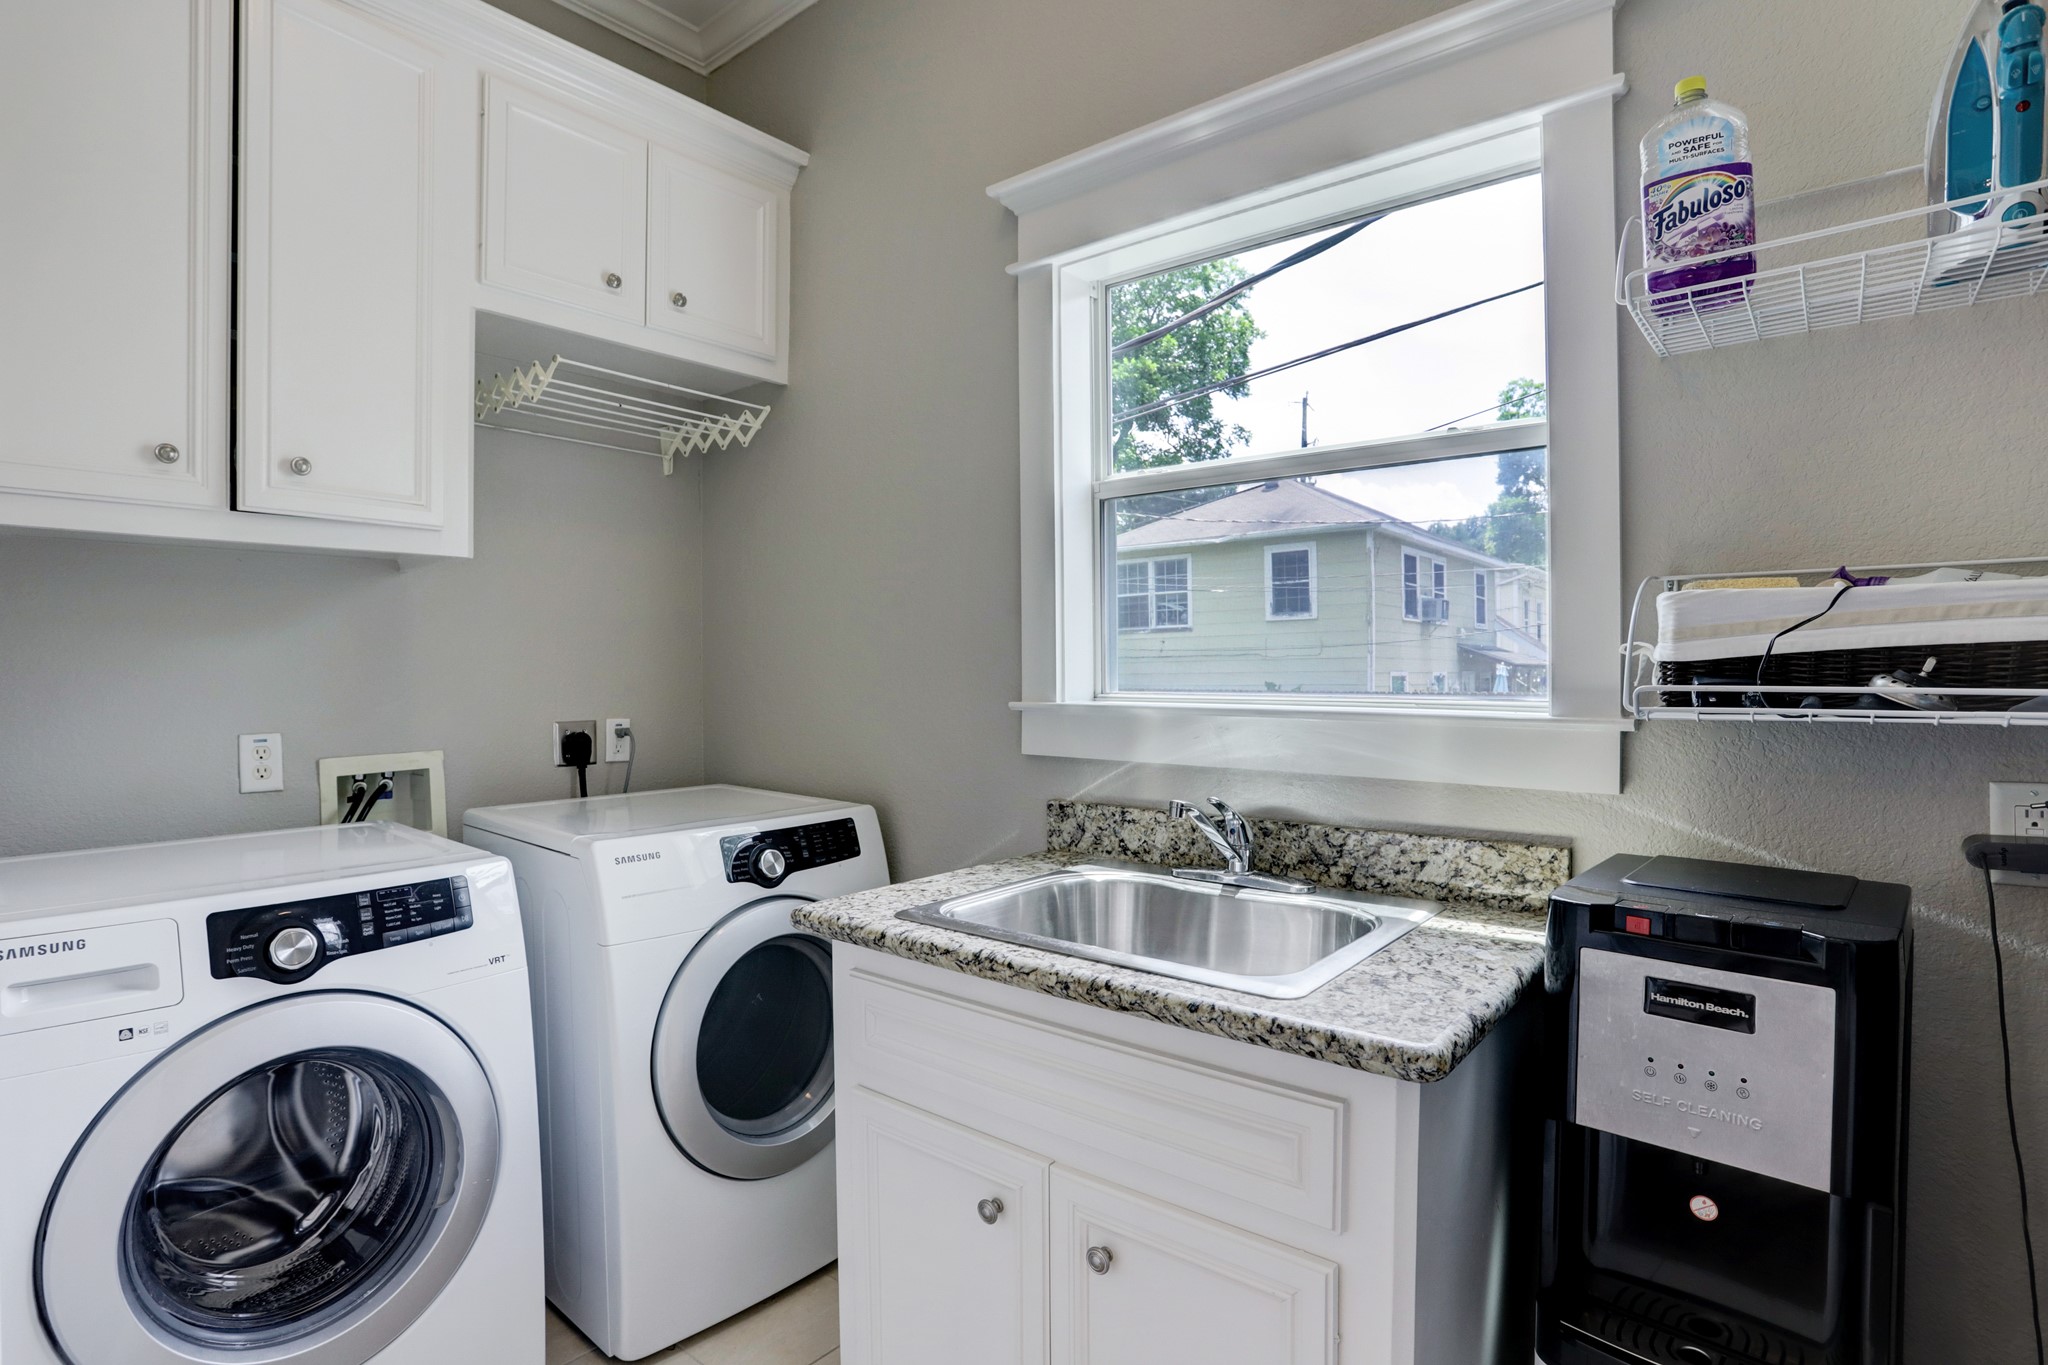 Utility room has plenty of storage and cabinet space along with utility sink.